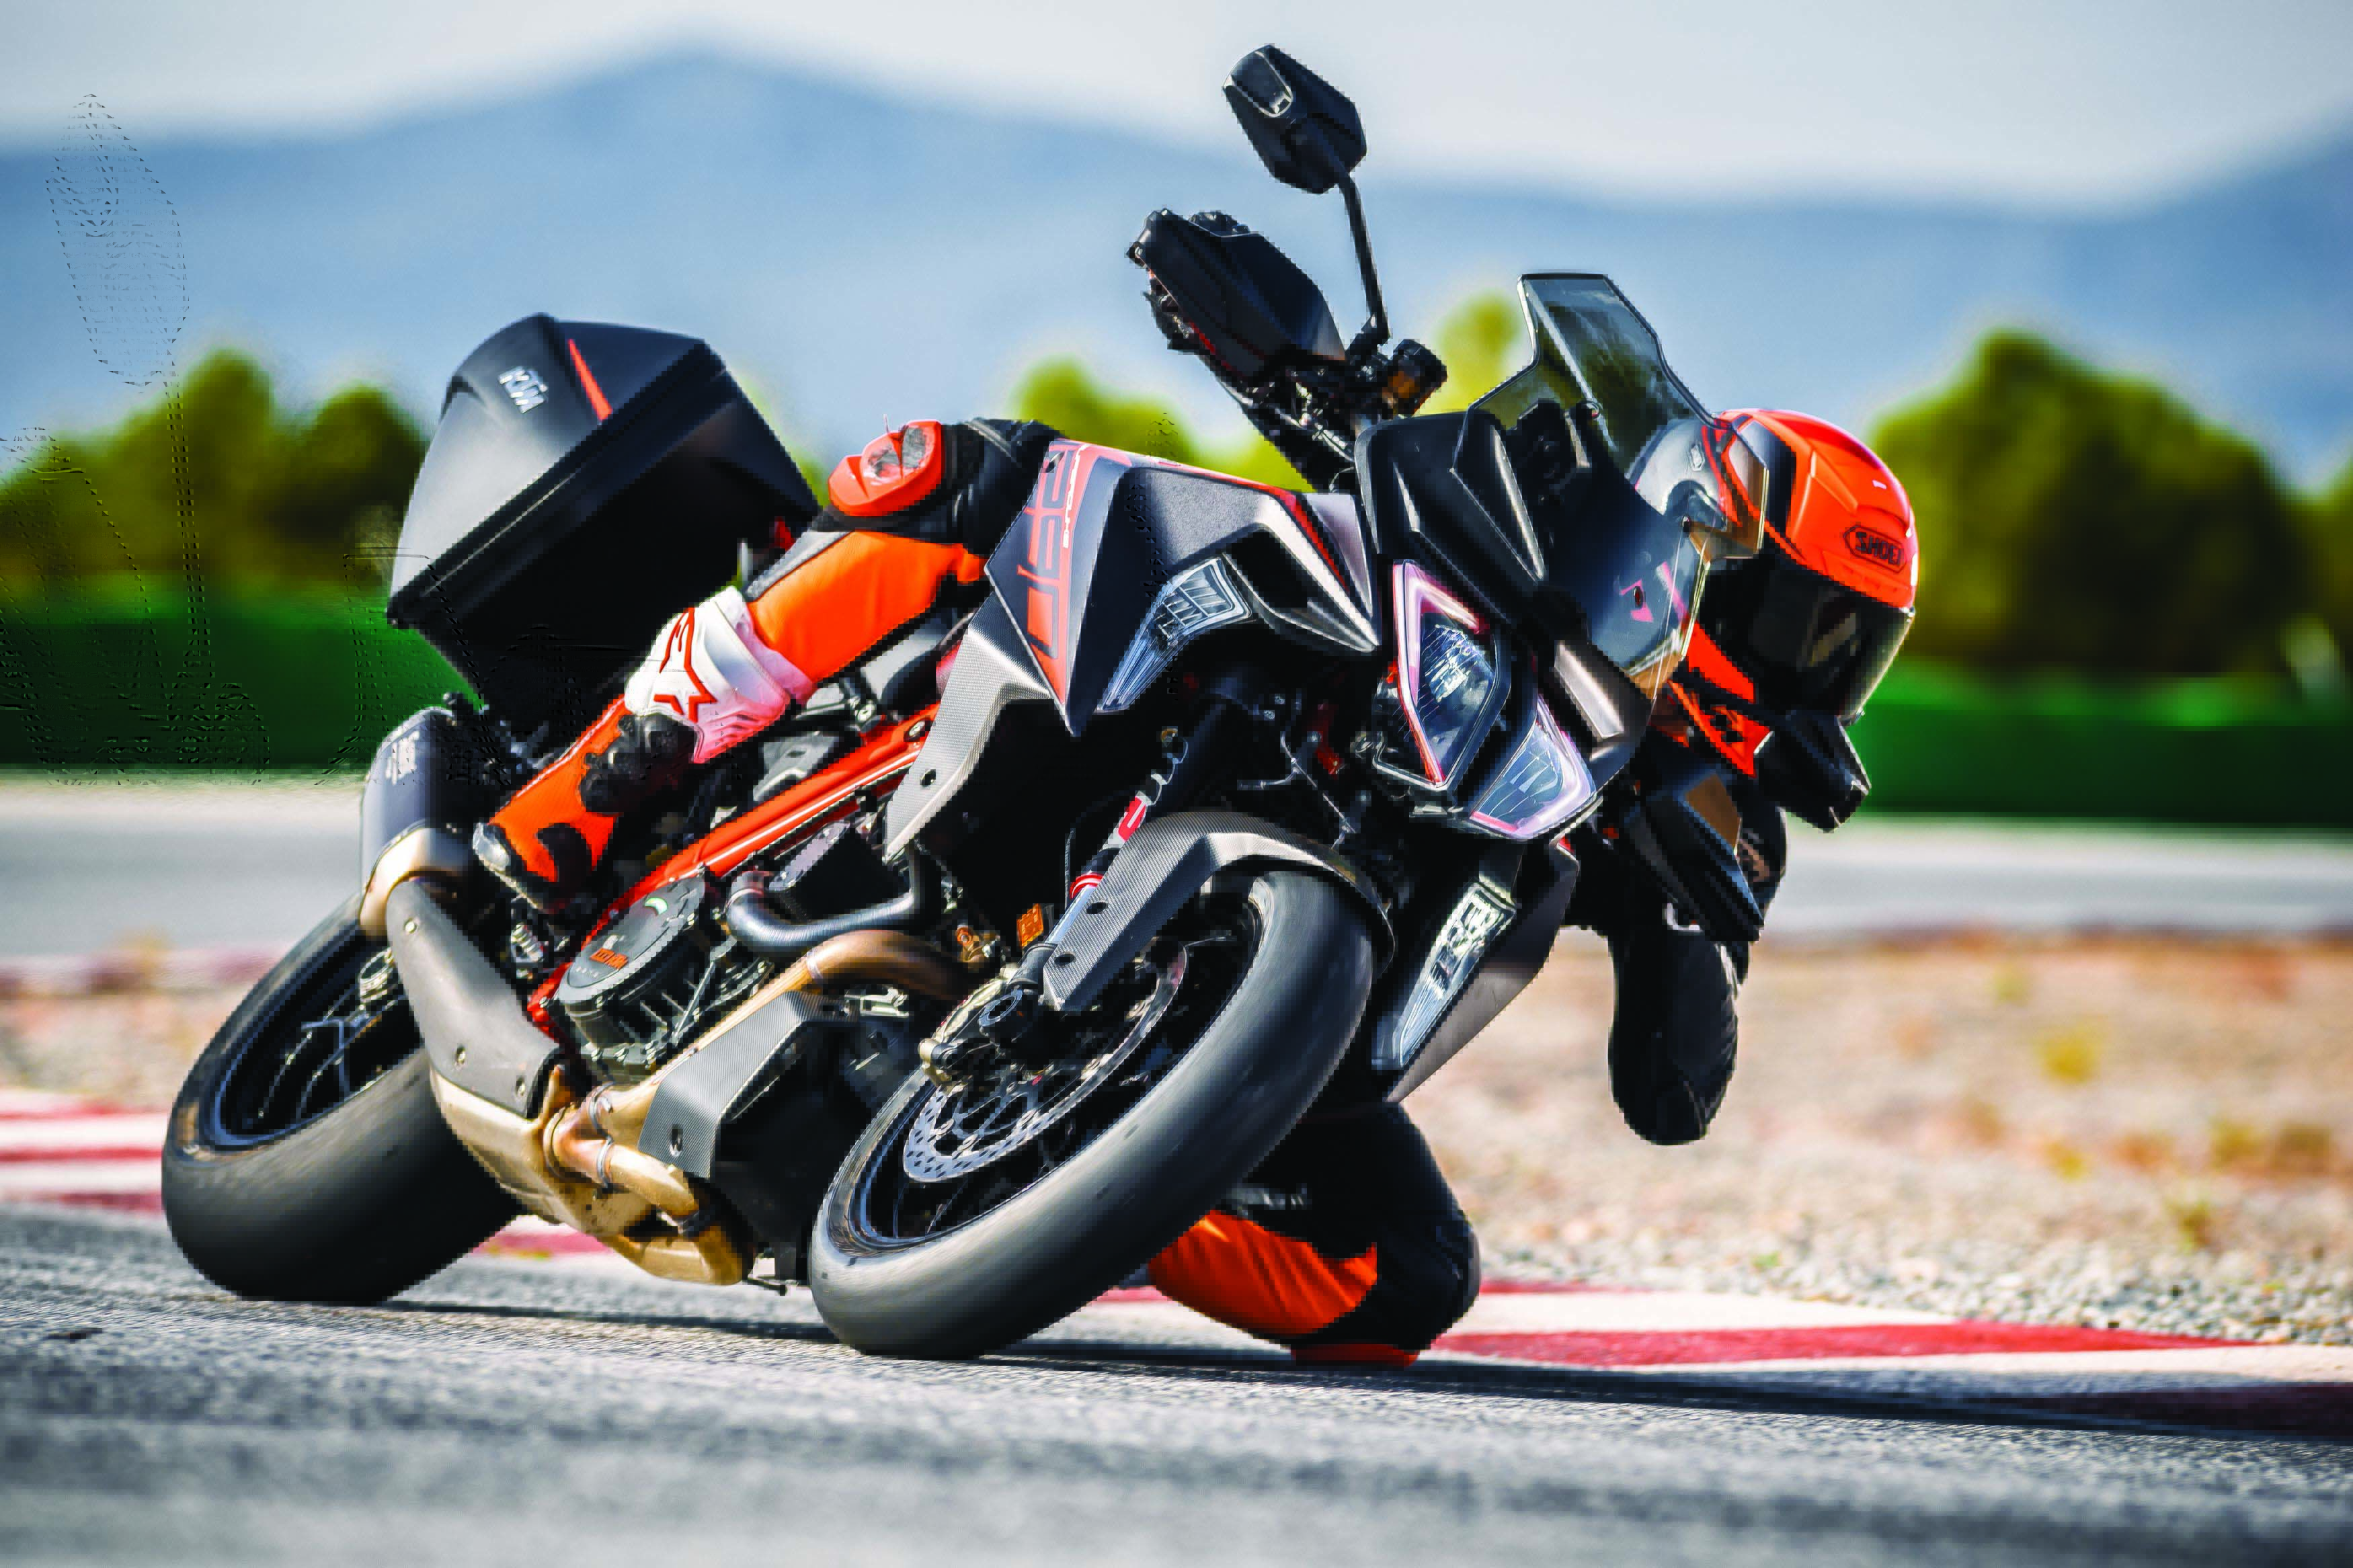 The KTM 1290 Super Duke GT Just Got More Awesome for 2019